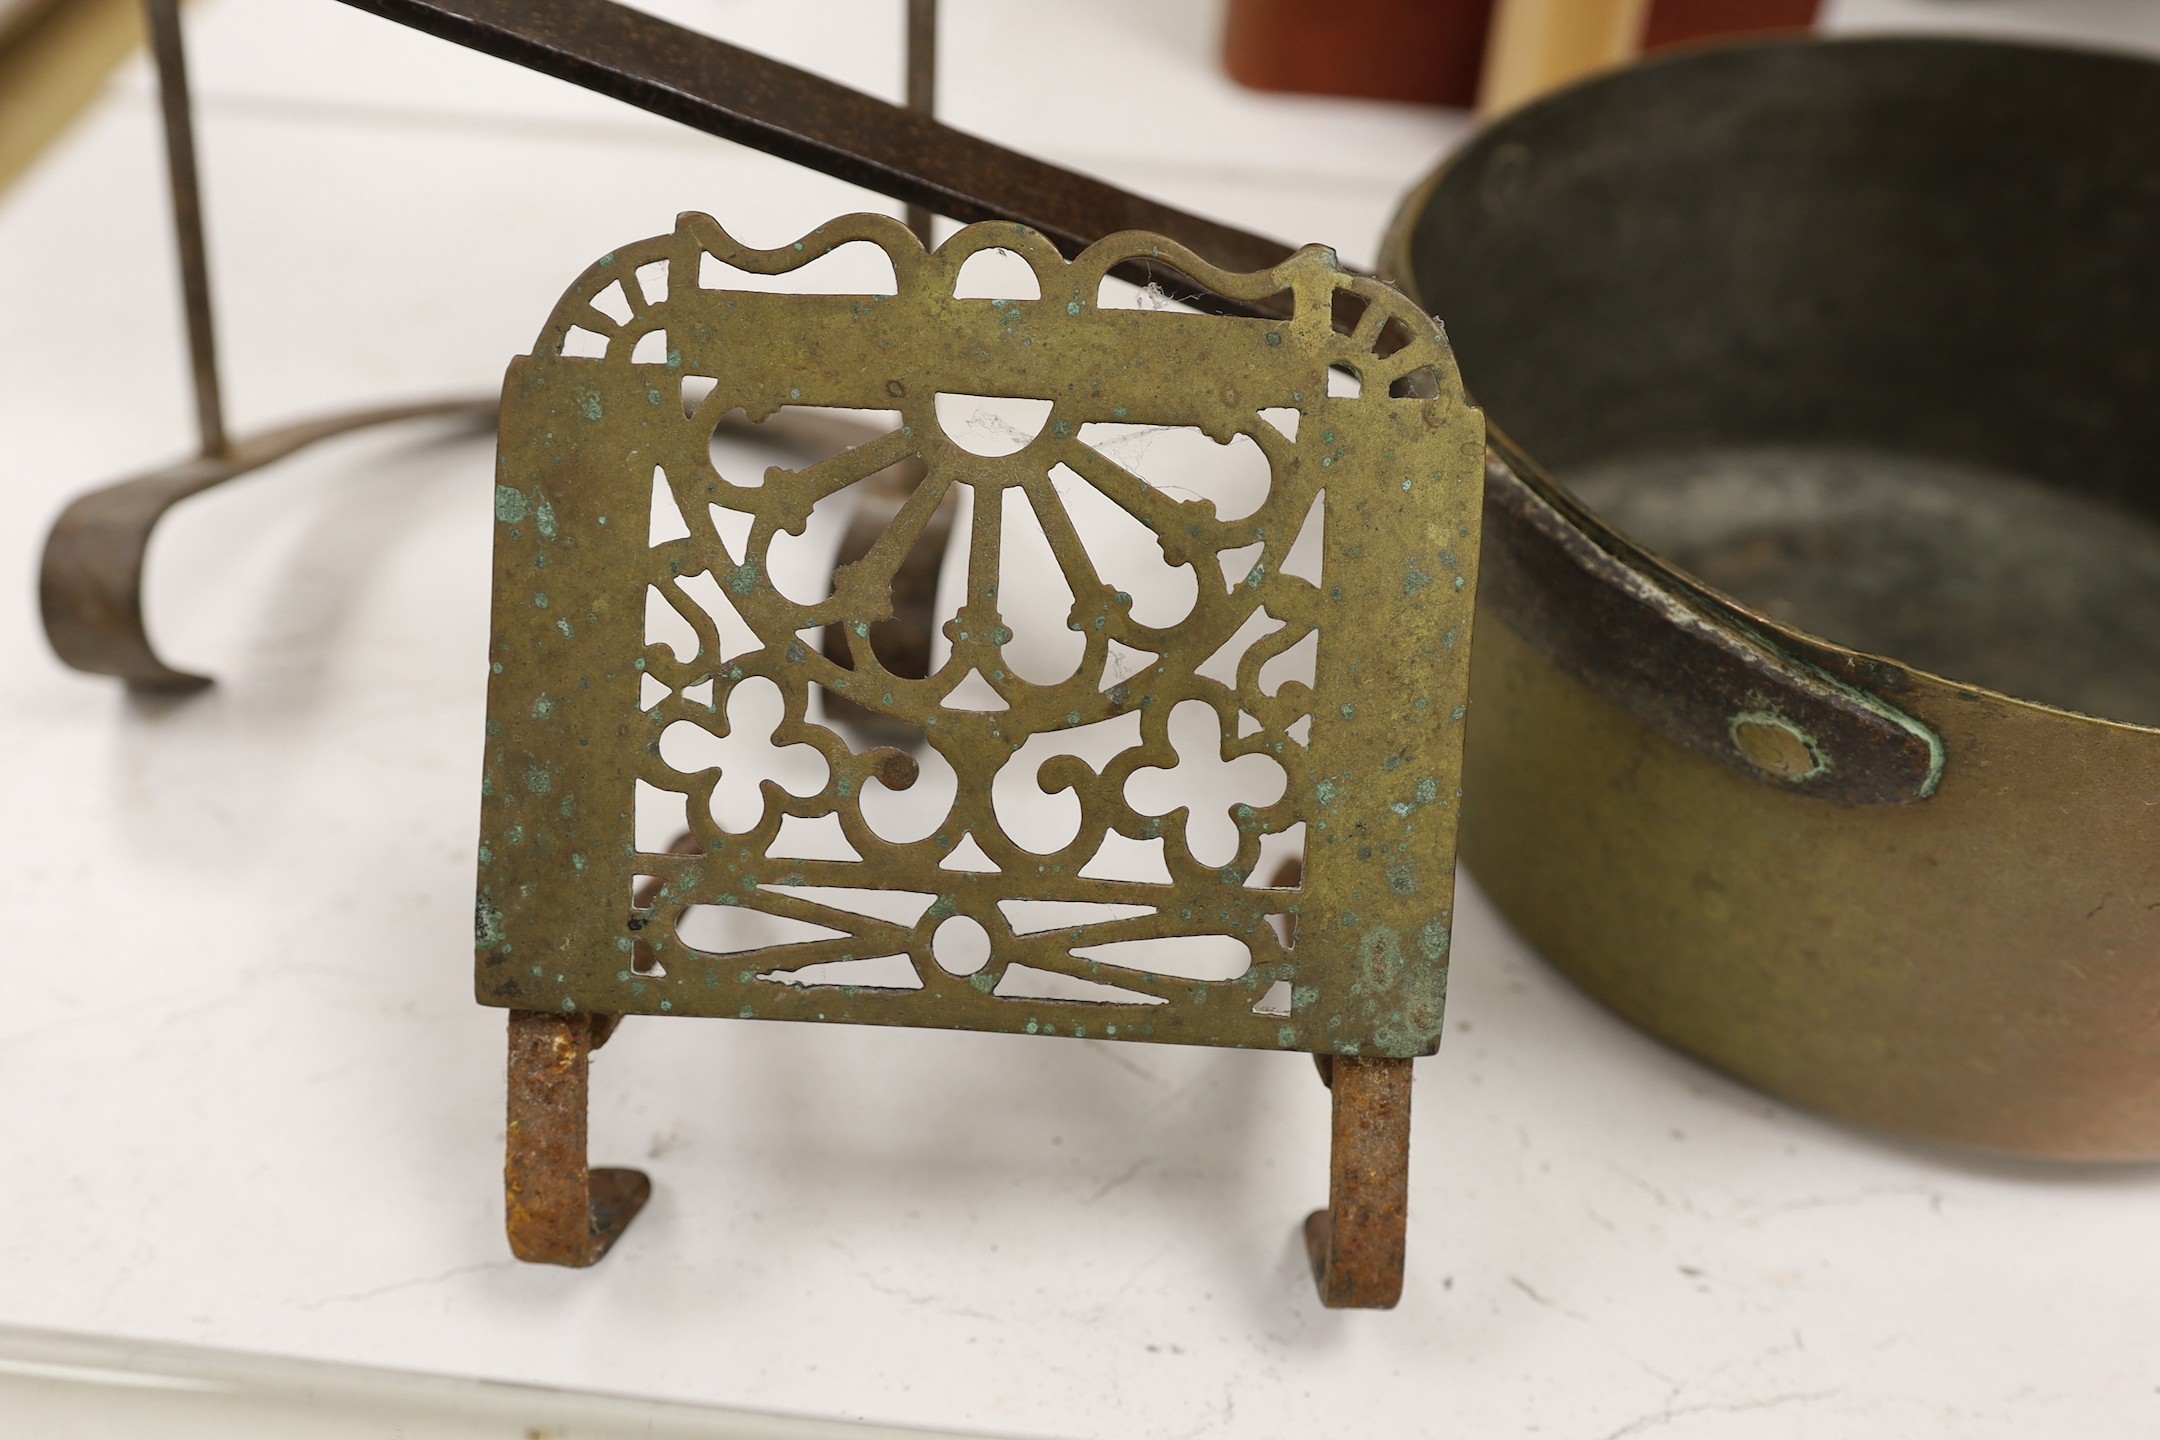 Two brass grate trivets, a crystal and brass towel rail and a 19th century copper pot